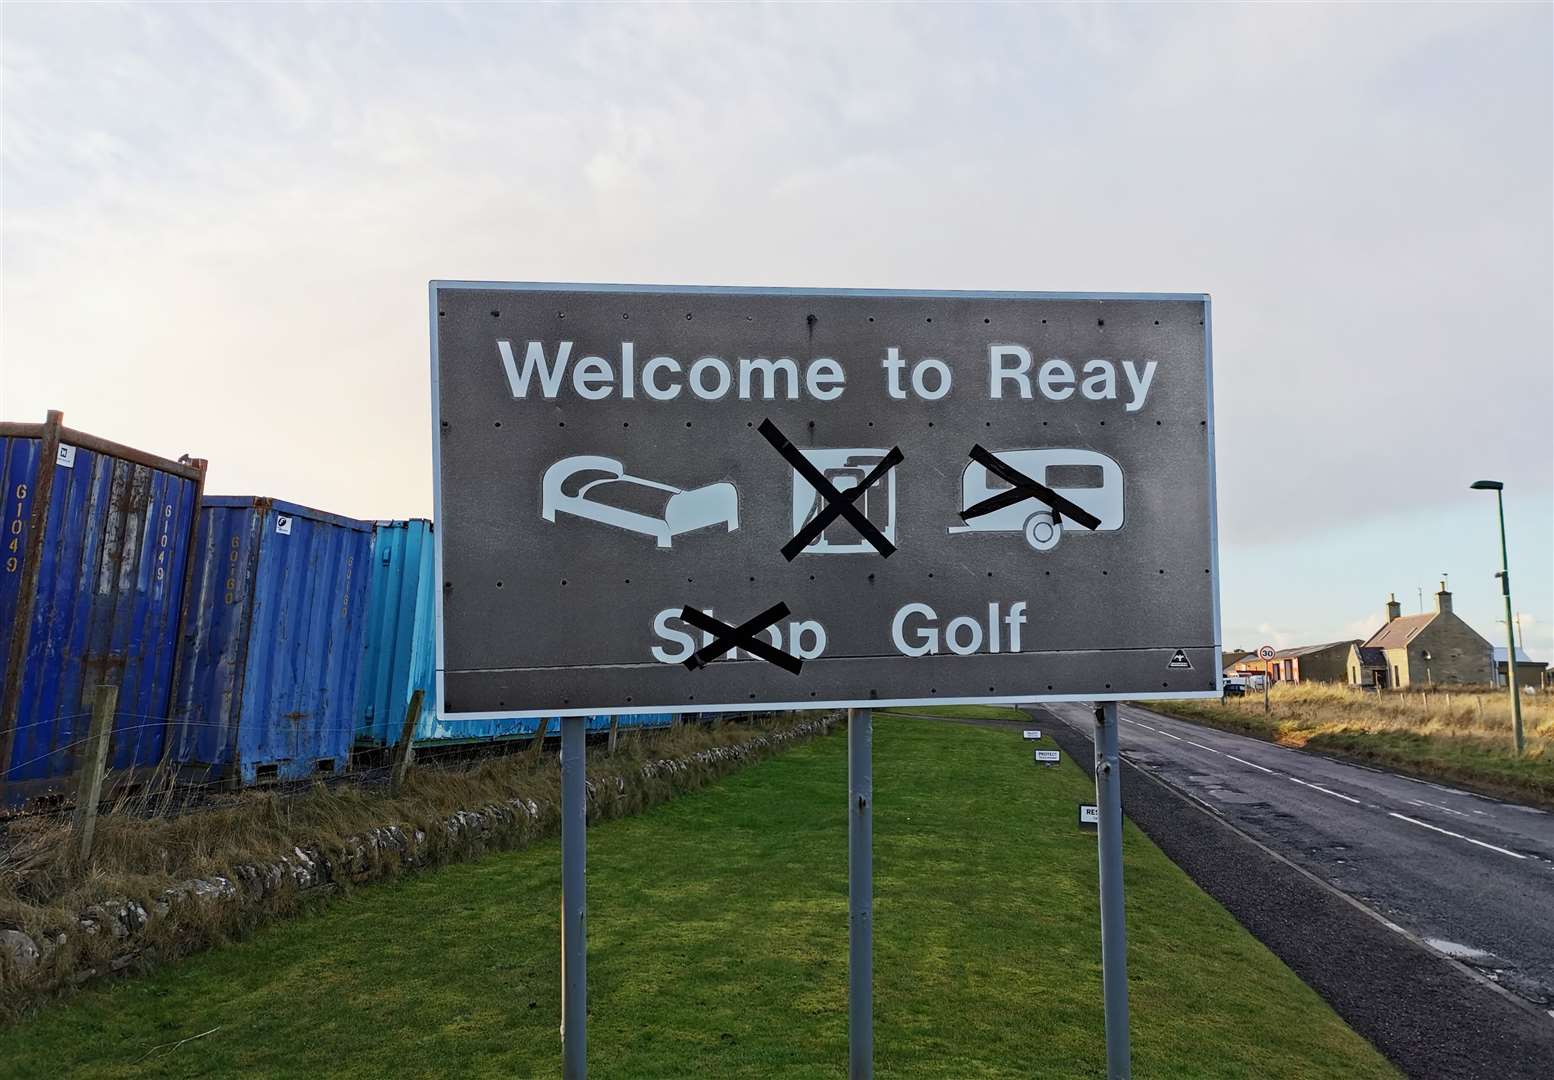 One of the former, out-of-date Reay gateway signs – now removed. One local resident said: 'They were just horrible – not what you'd want to advertise your village with at all.'